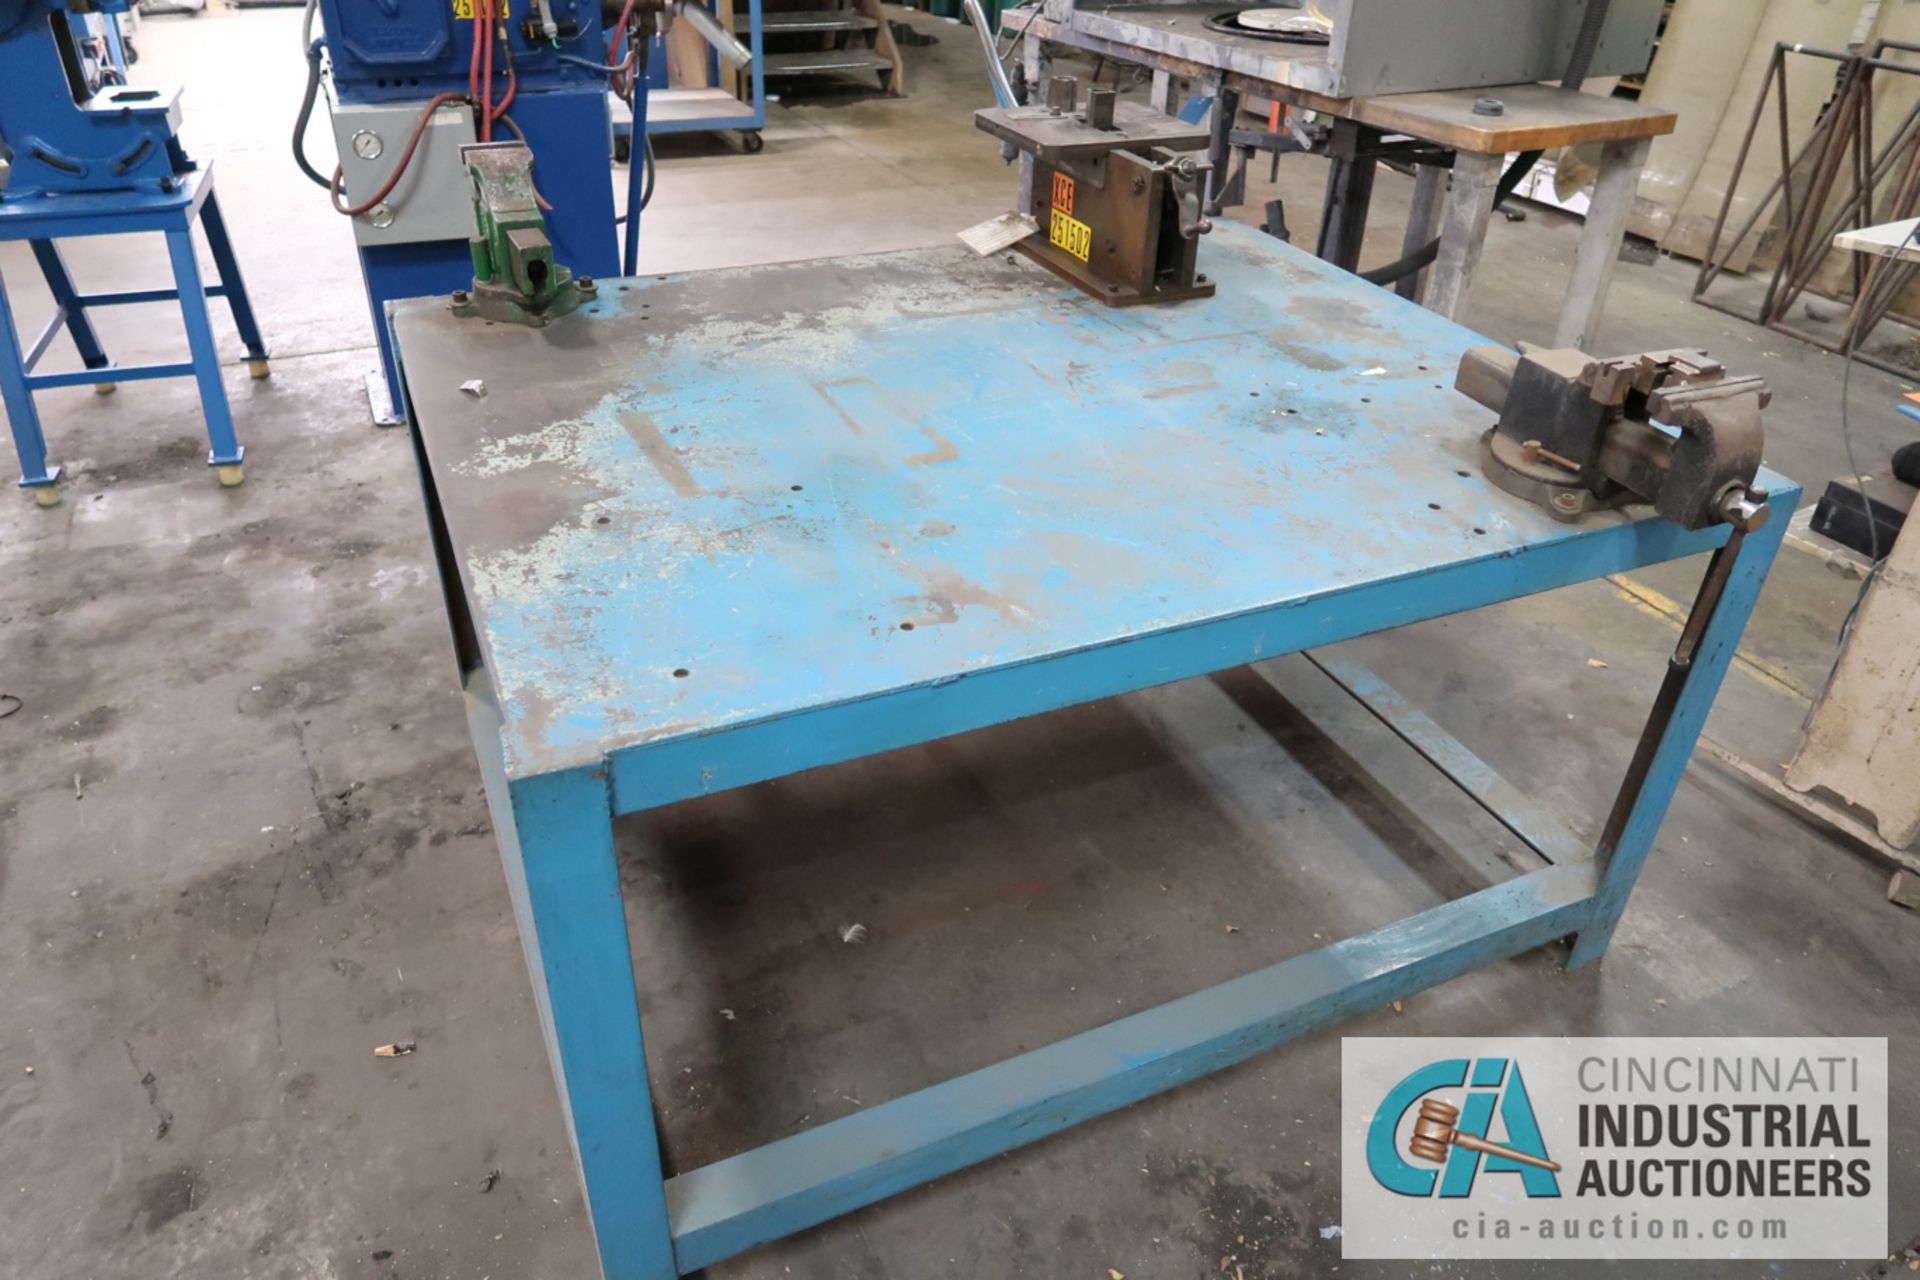 60" X 48" HEAVY DUTY STEEL TABLE WITH 6" AND 4" VISES, AND MANUAL MULTI-PURPOSE BENDER